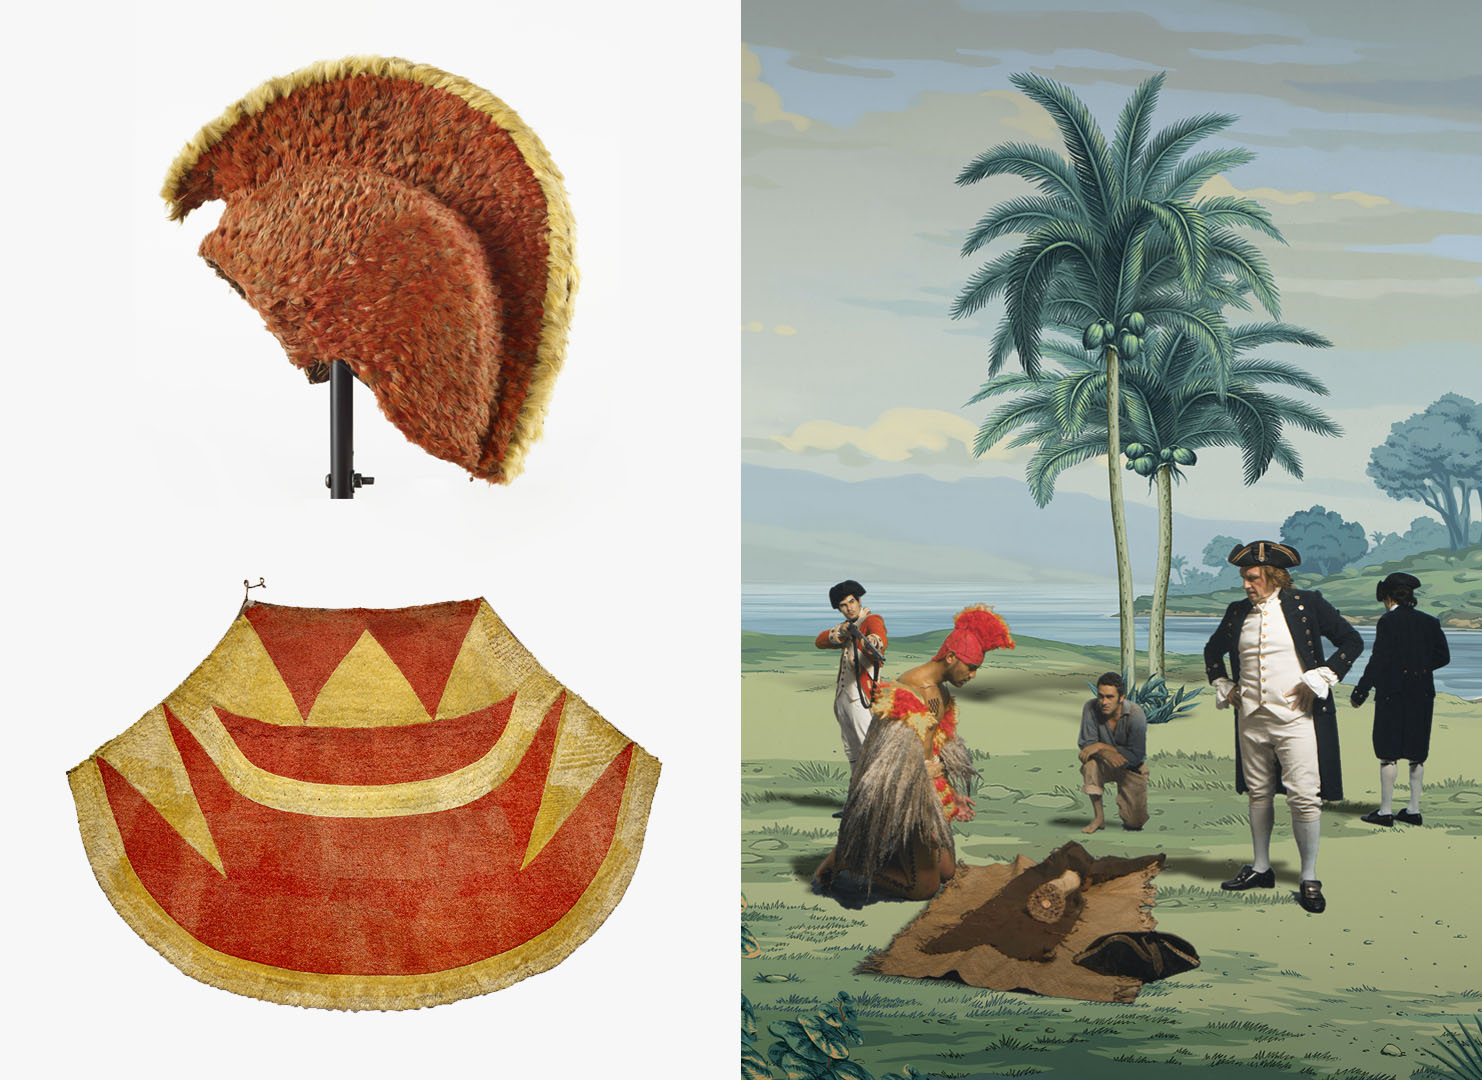 On the left is a bright orange feathered helmet and cloak, on the right is a still from Lisa Reihana's in Pursuit of Venus [infected] showing a man wearing these items